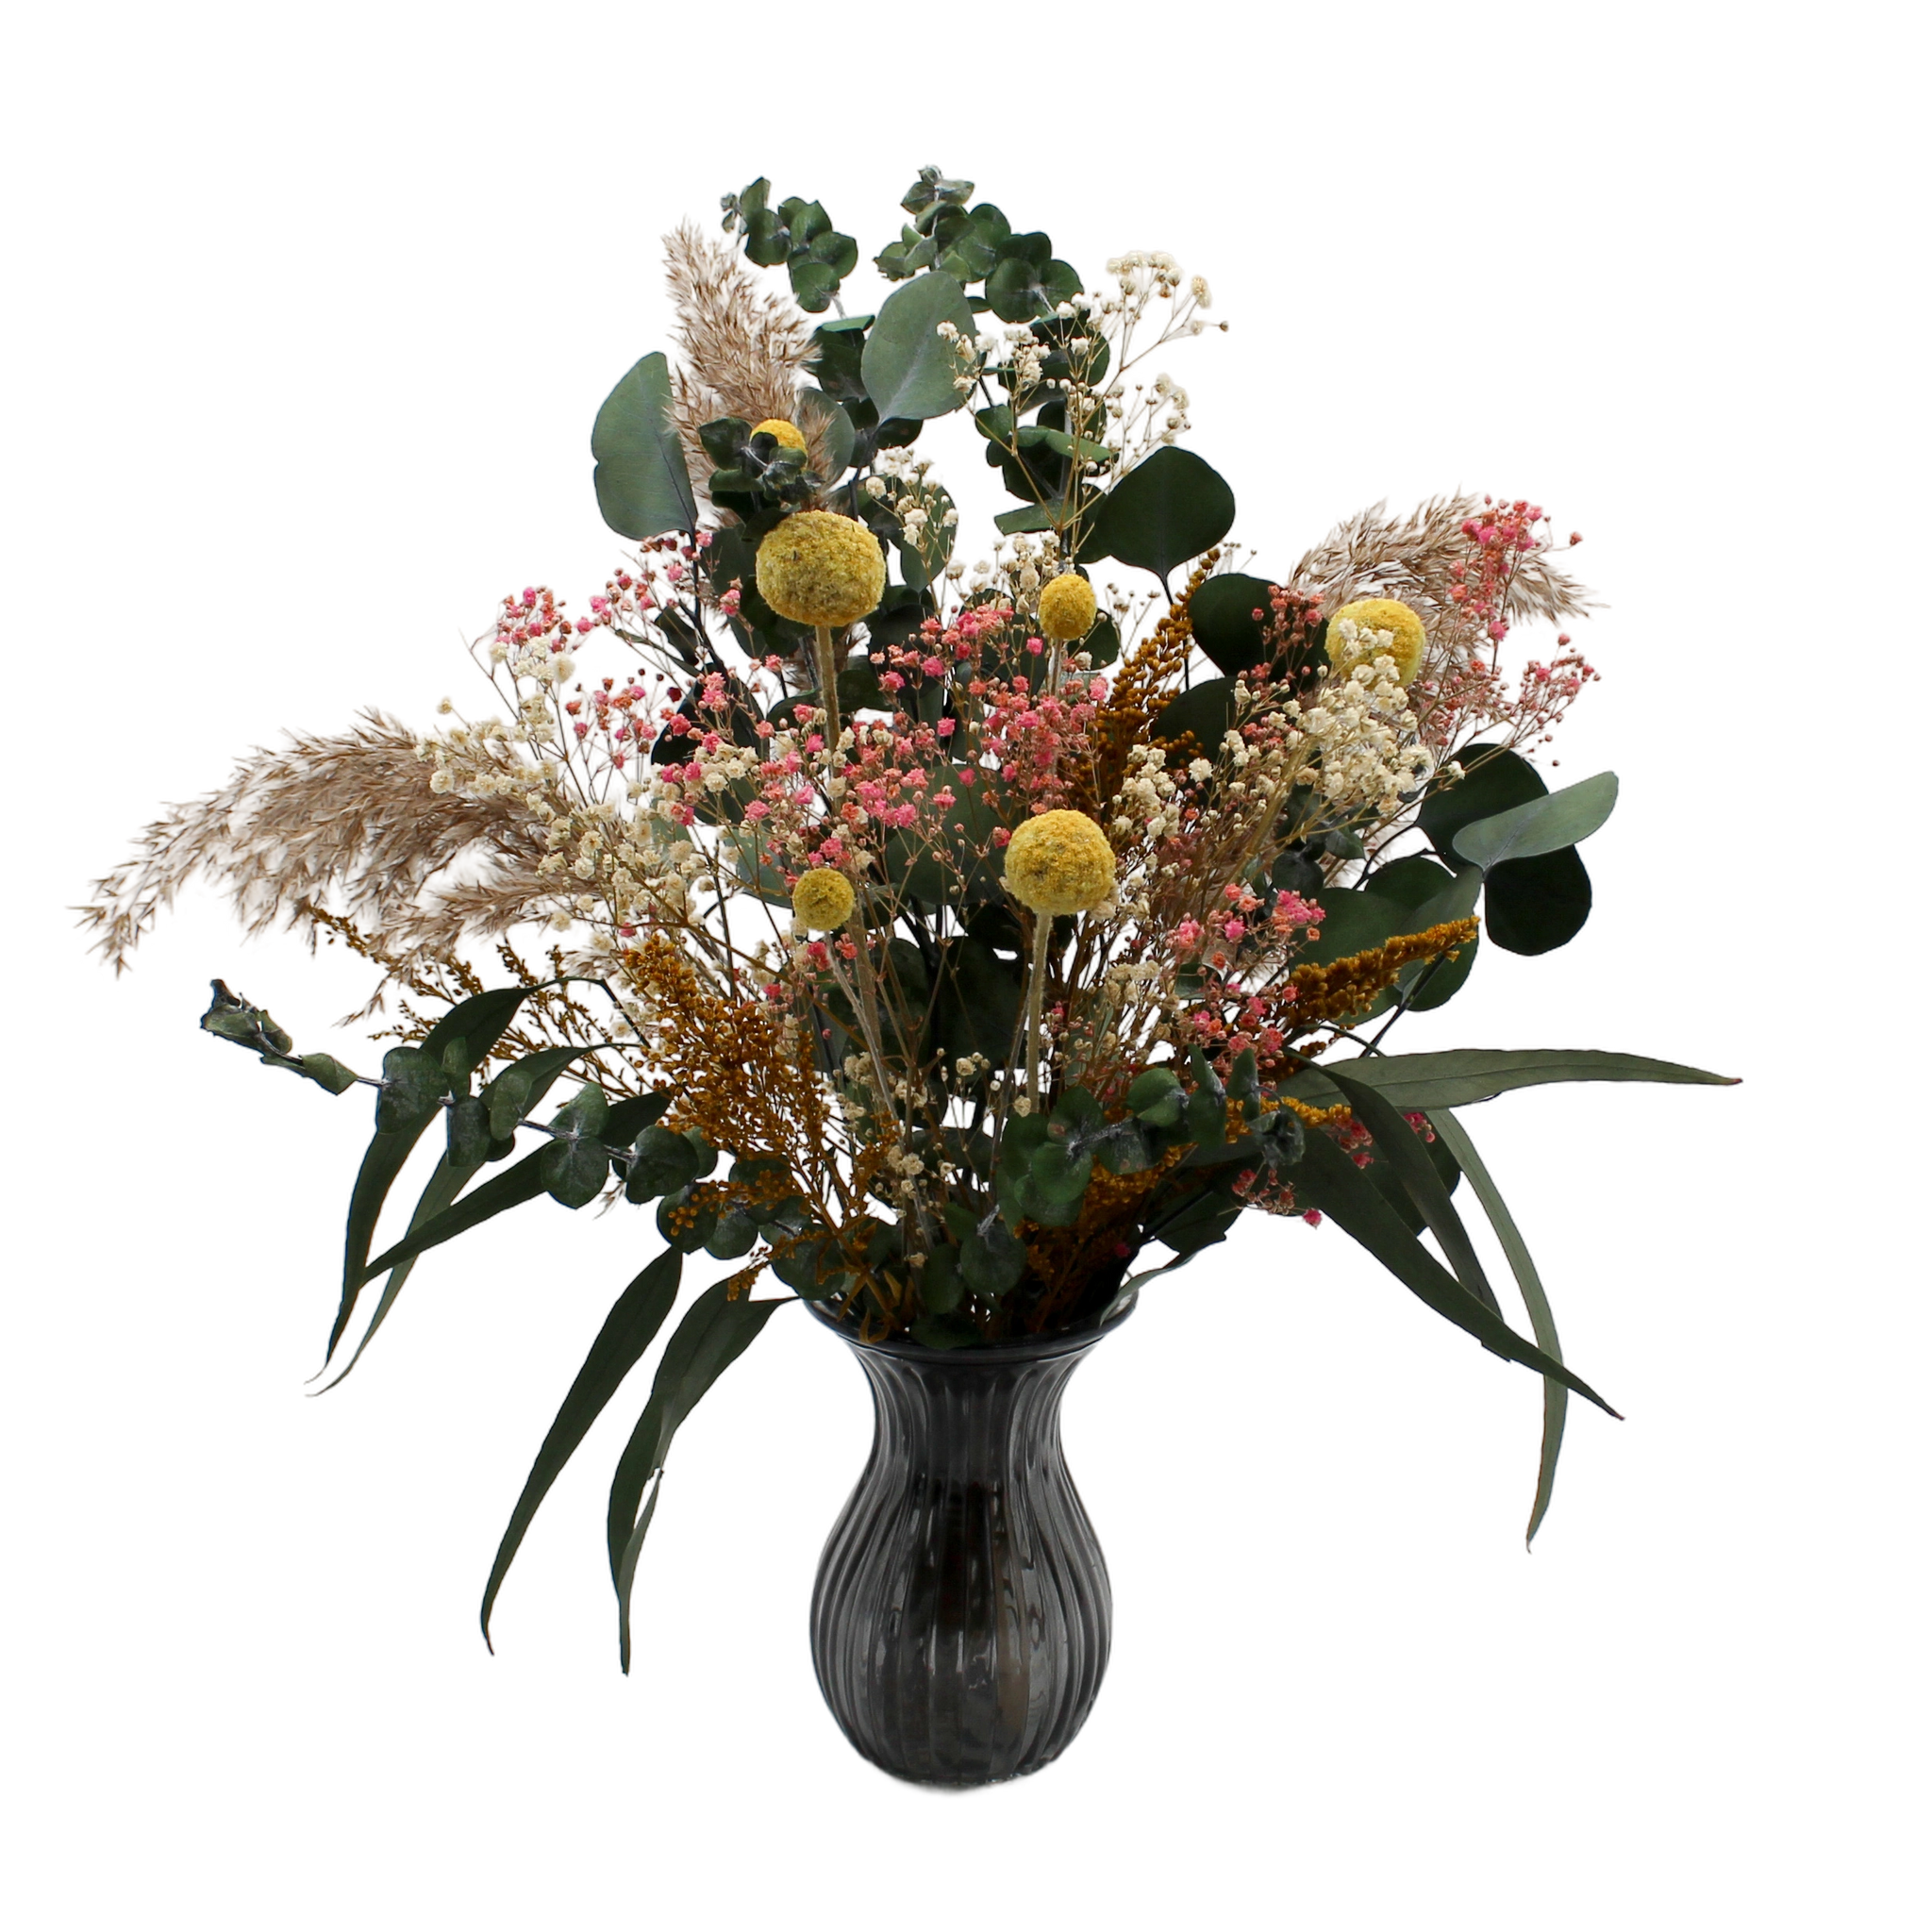 Preserved flower Bouquet in vase including eucalyptus, billy buttons, pink gypsophila and pampas